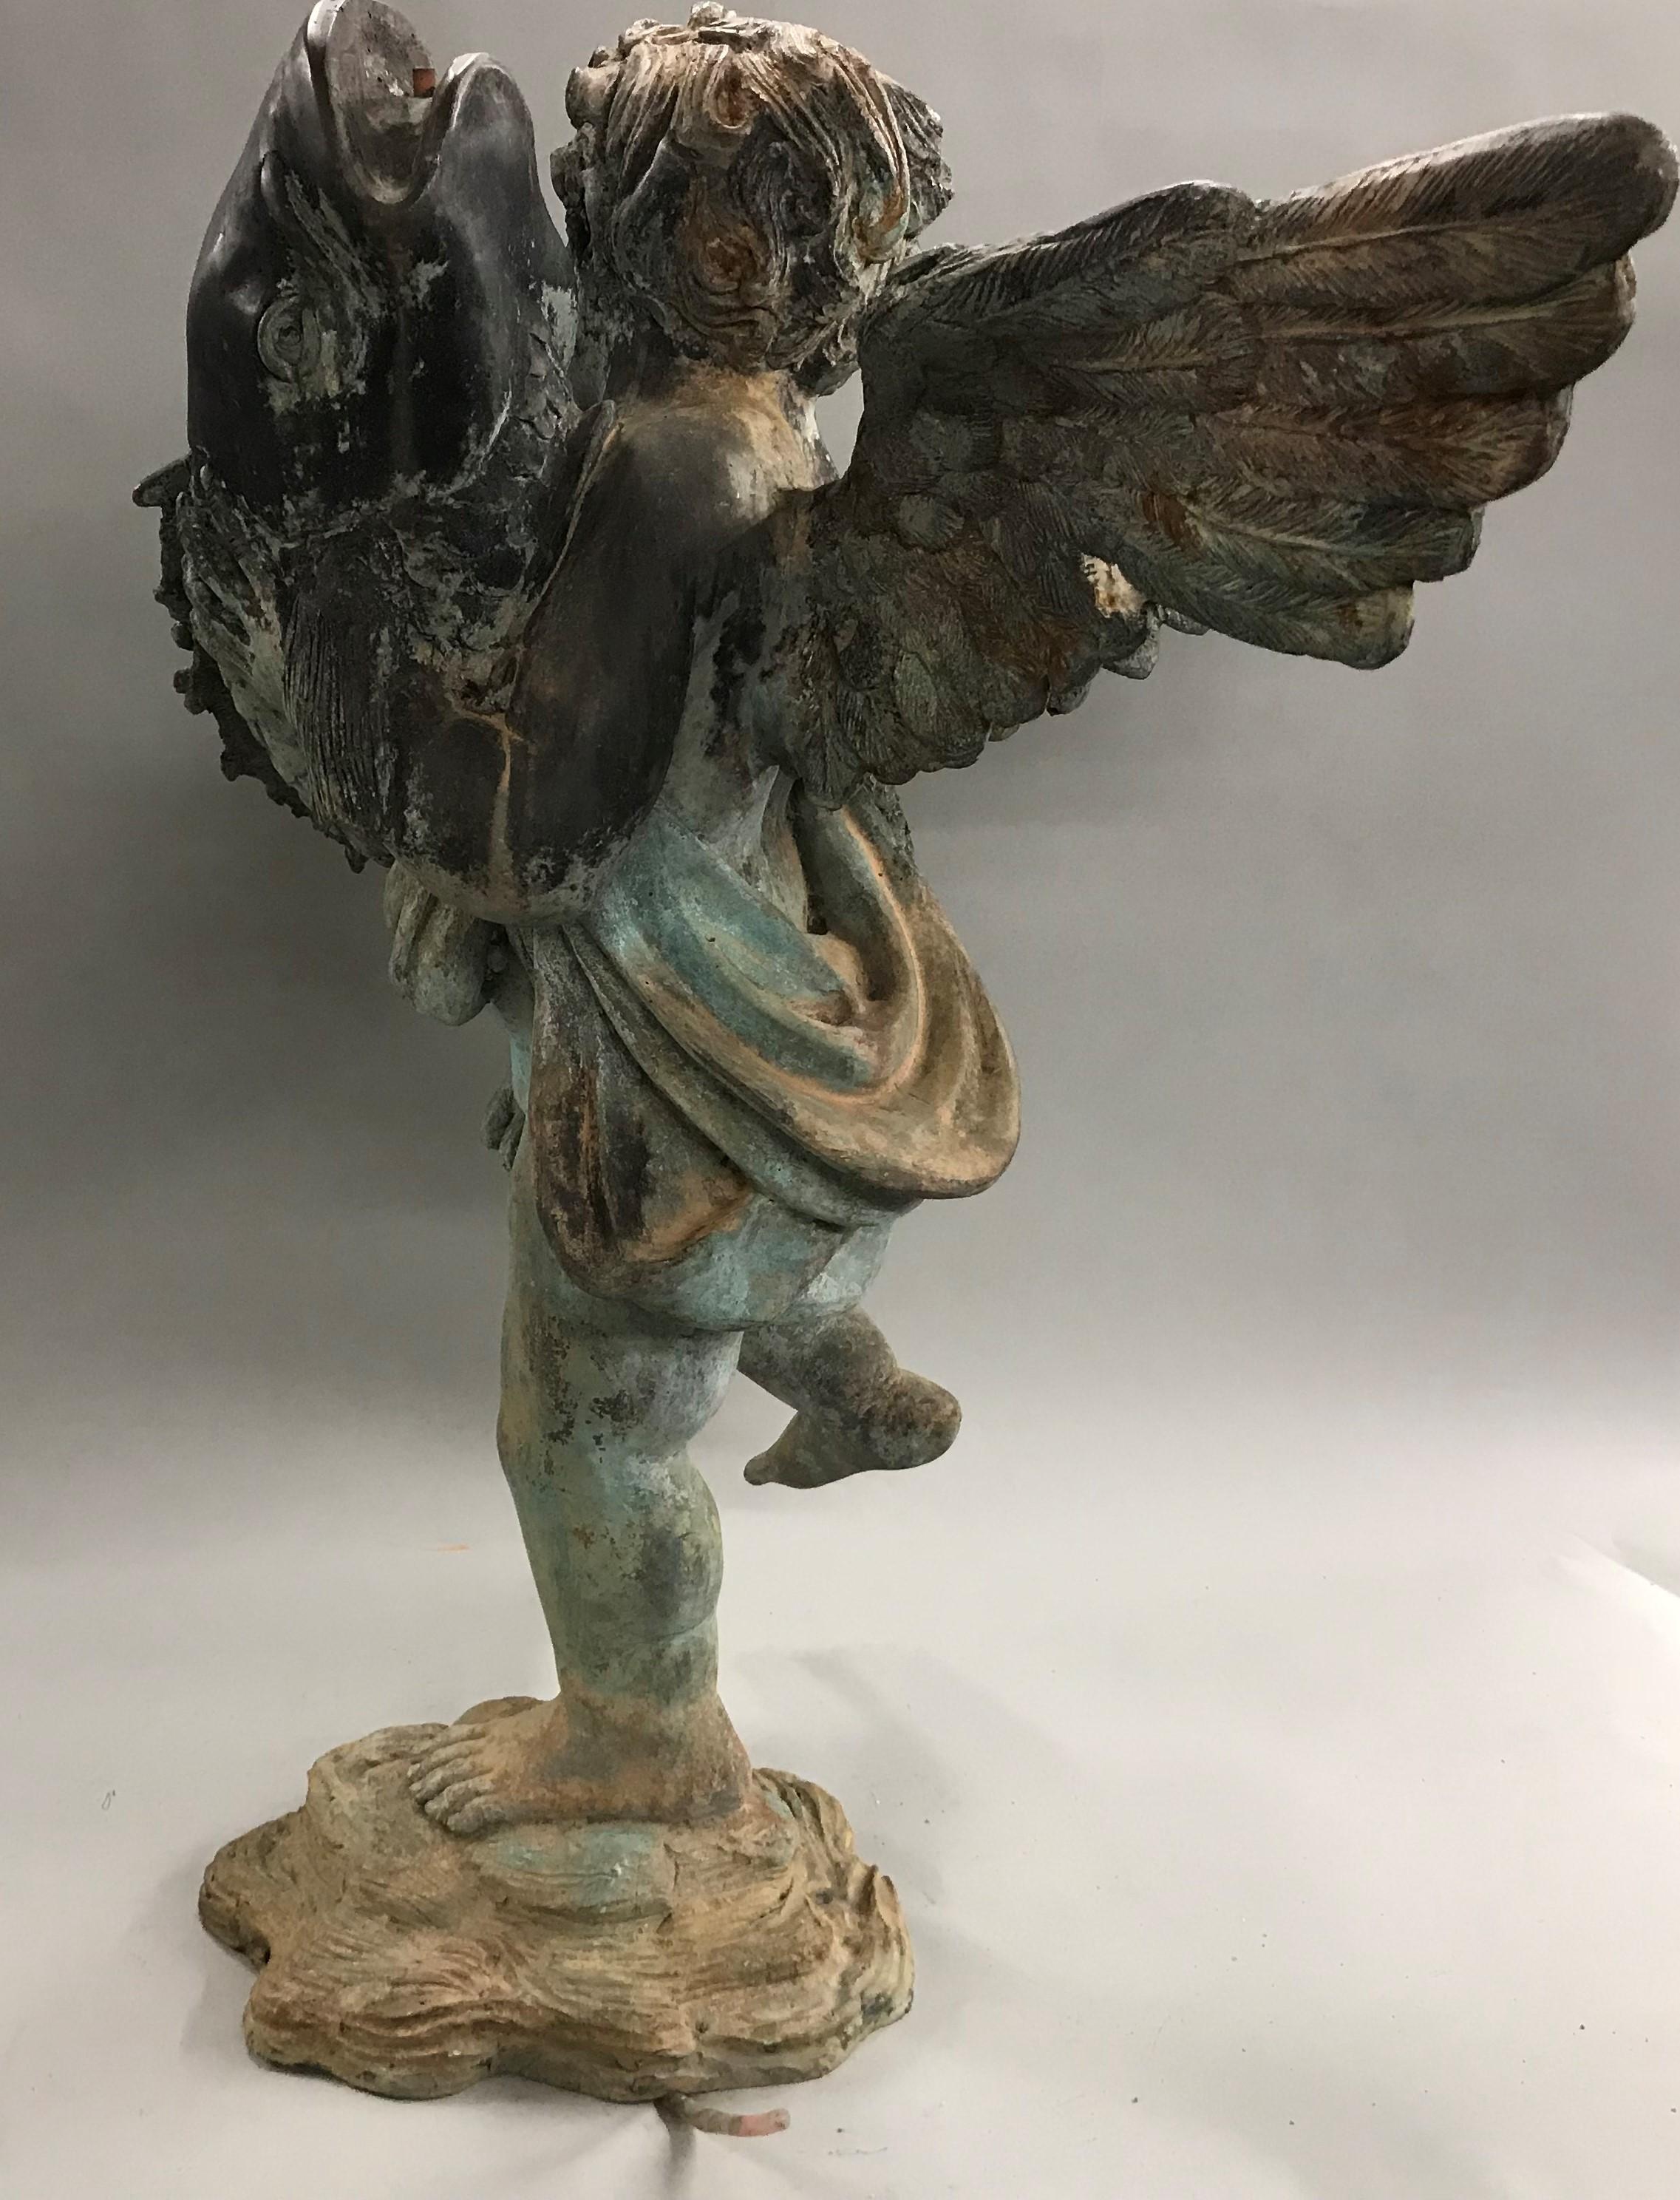 20th Century French Style Cast Iron Fountain with Winged Cherub or Putti Holding a Fish